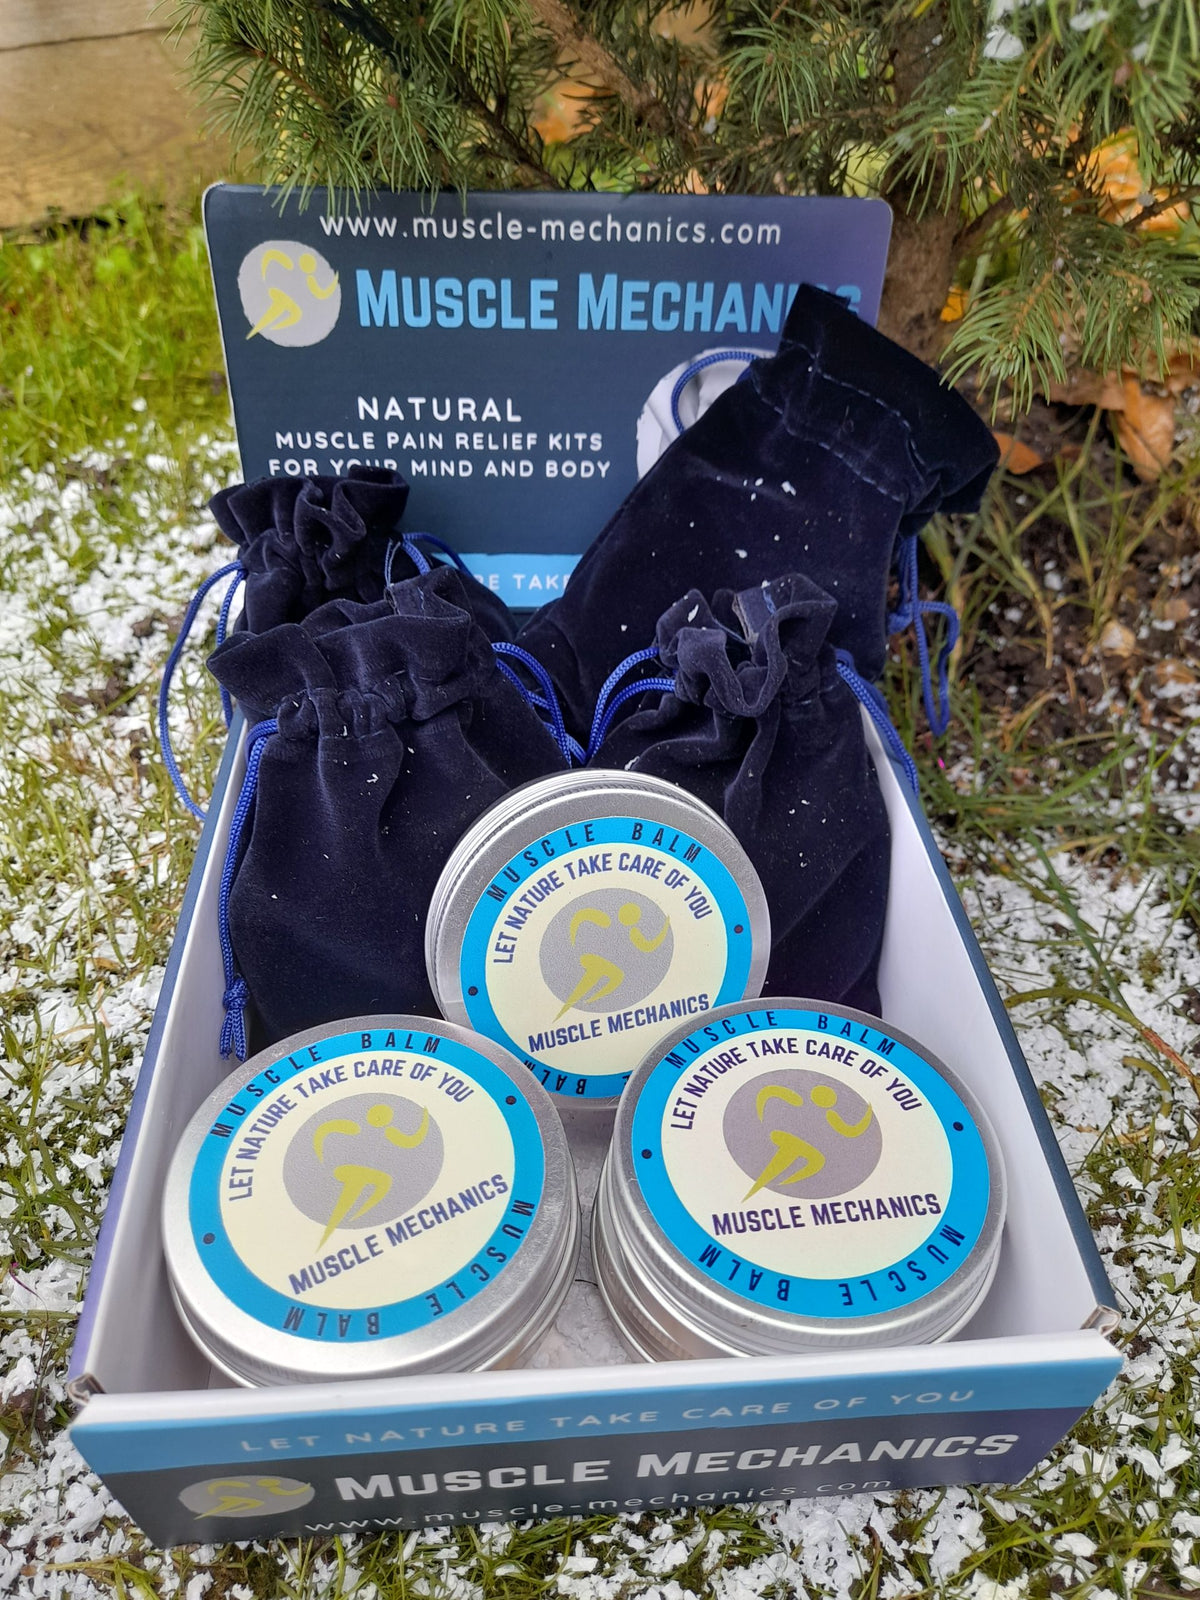 Winter Warmer Muscle Recovery Balm Multipack - 4 Tins